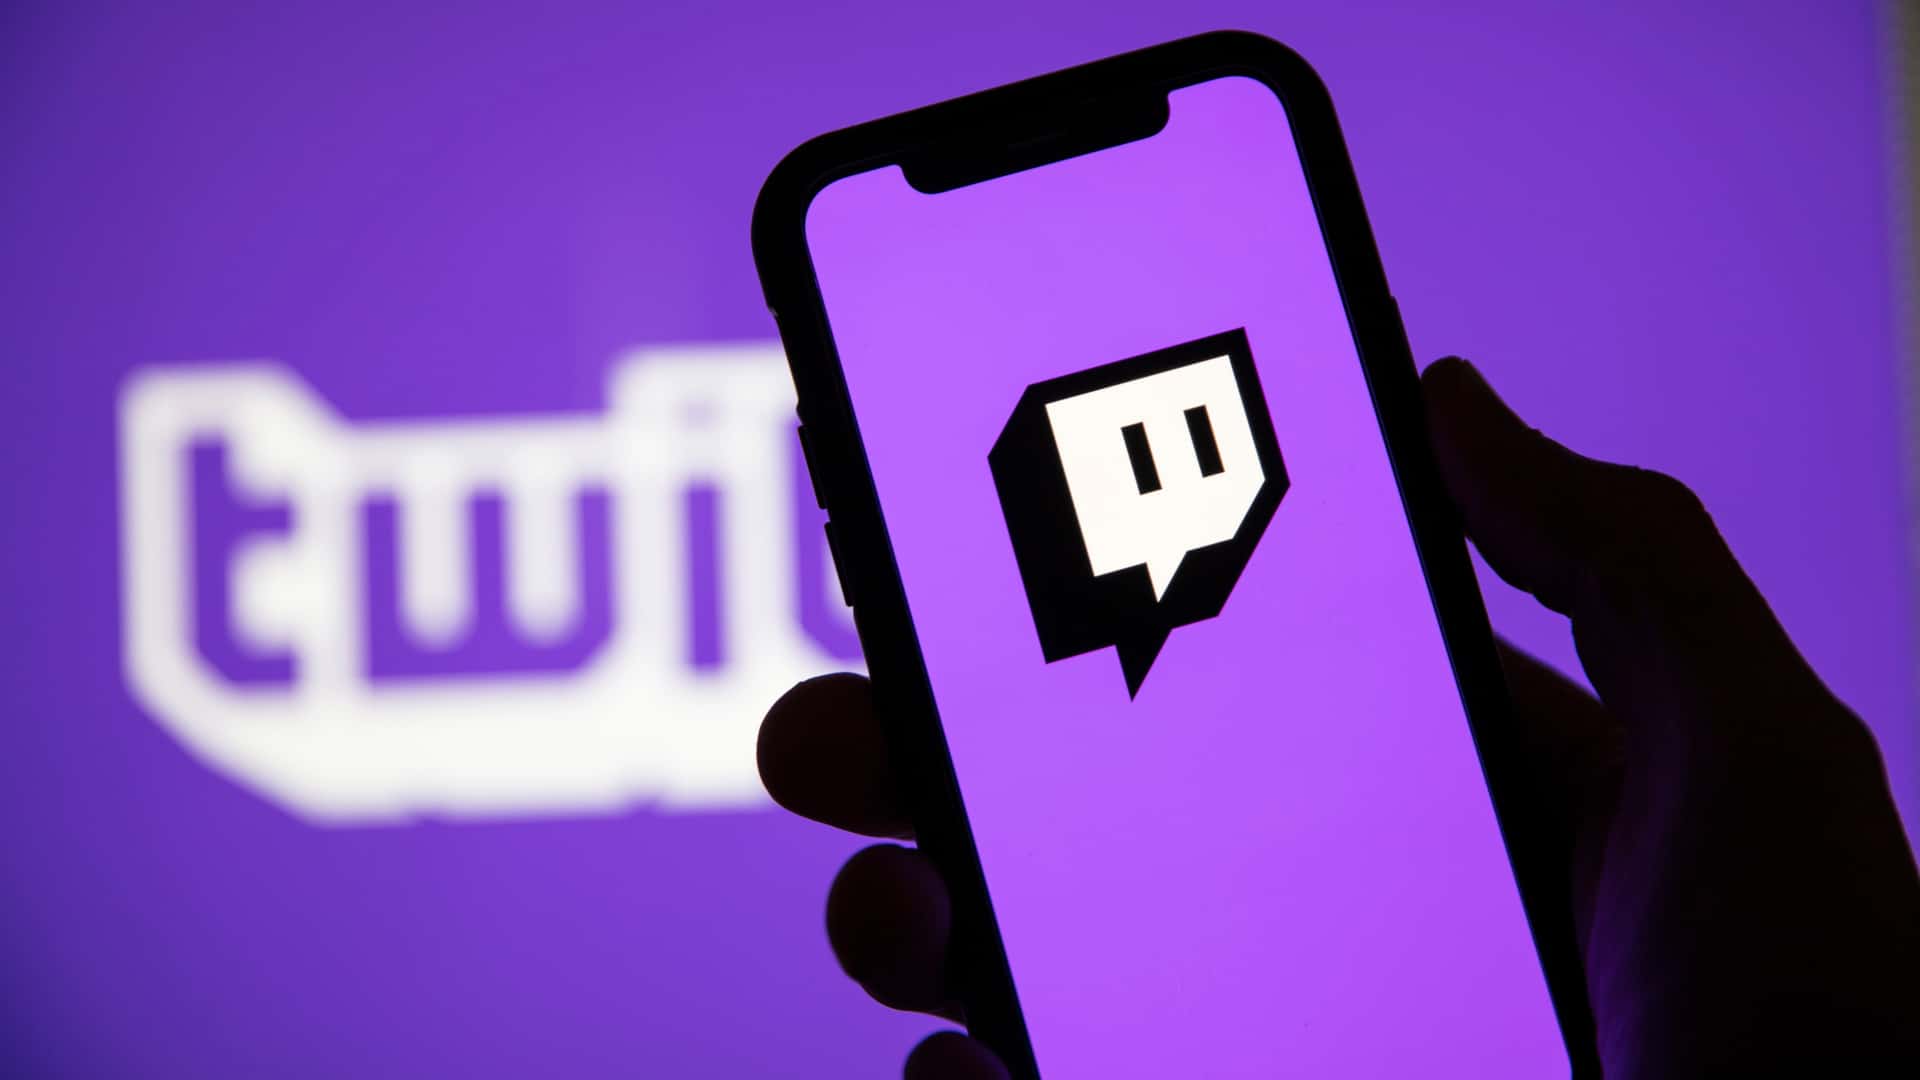 Warner Music Group and Twitch announce special partnership